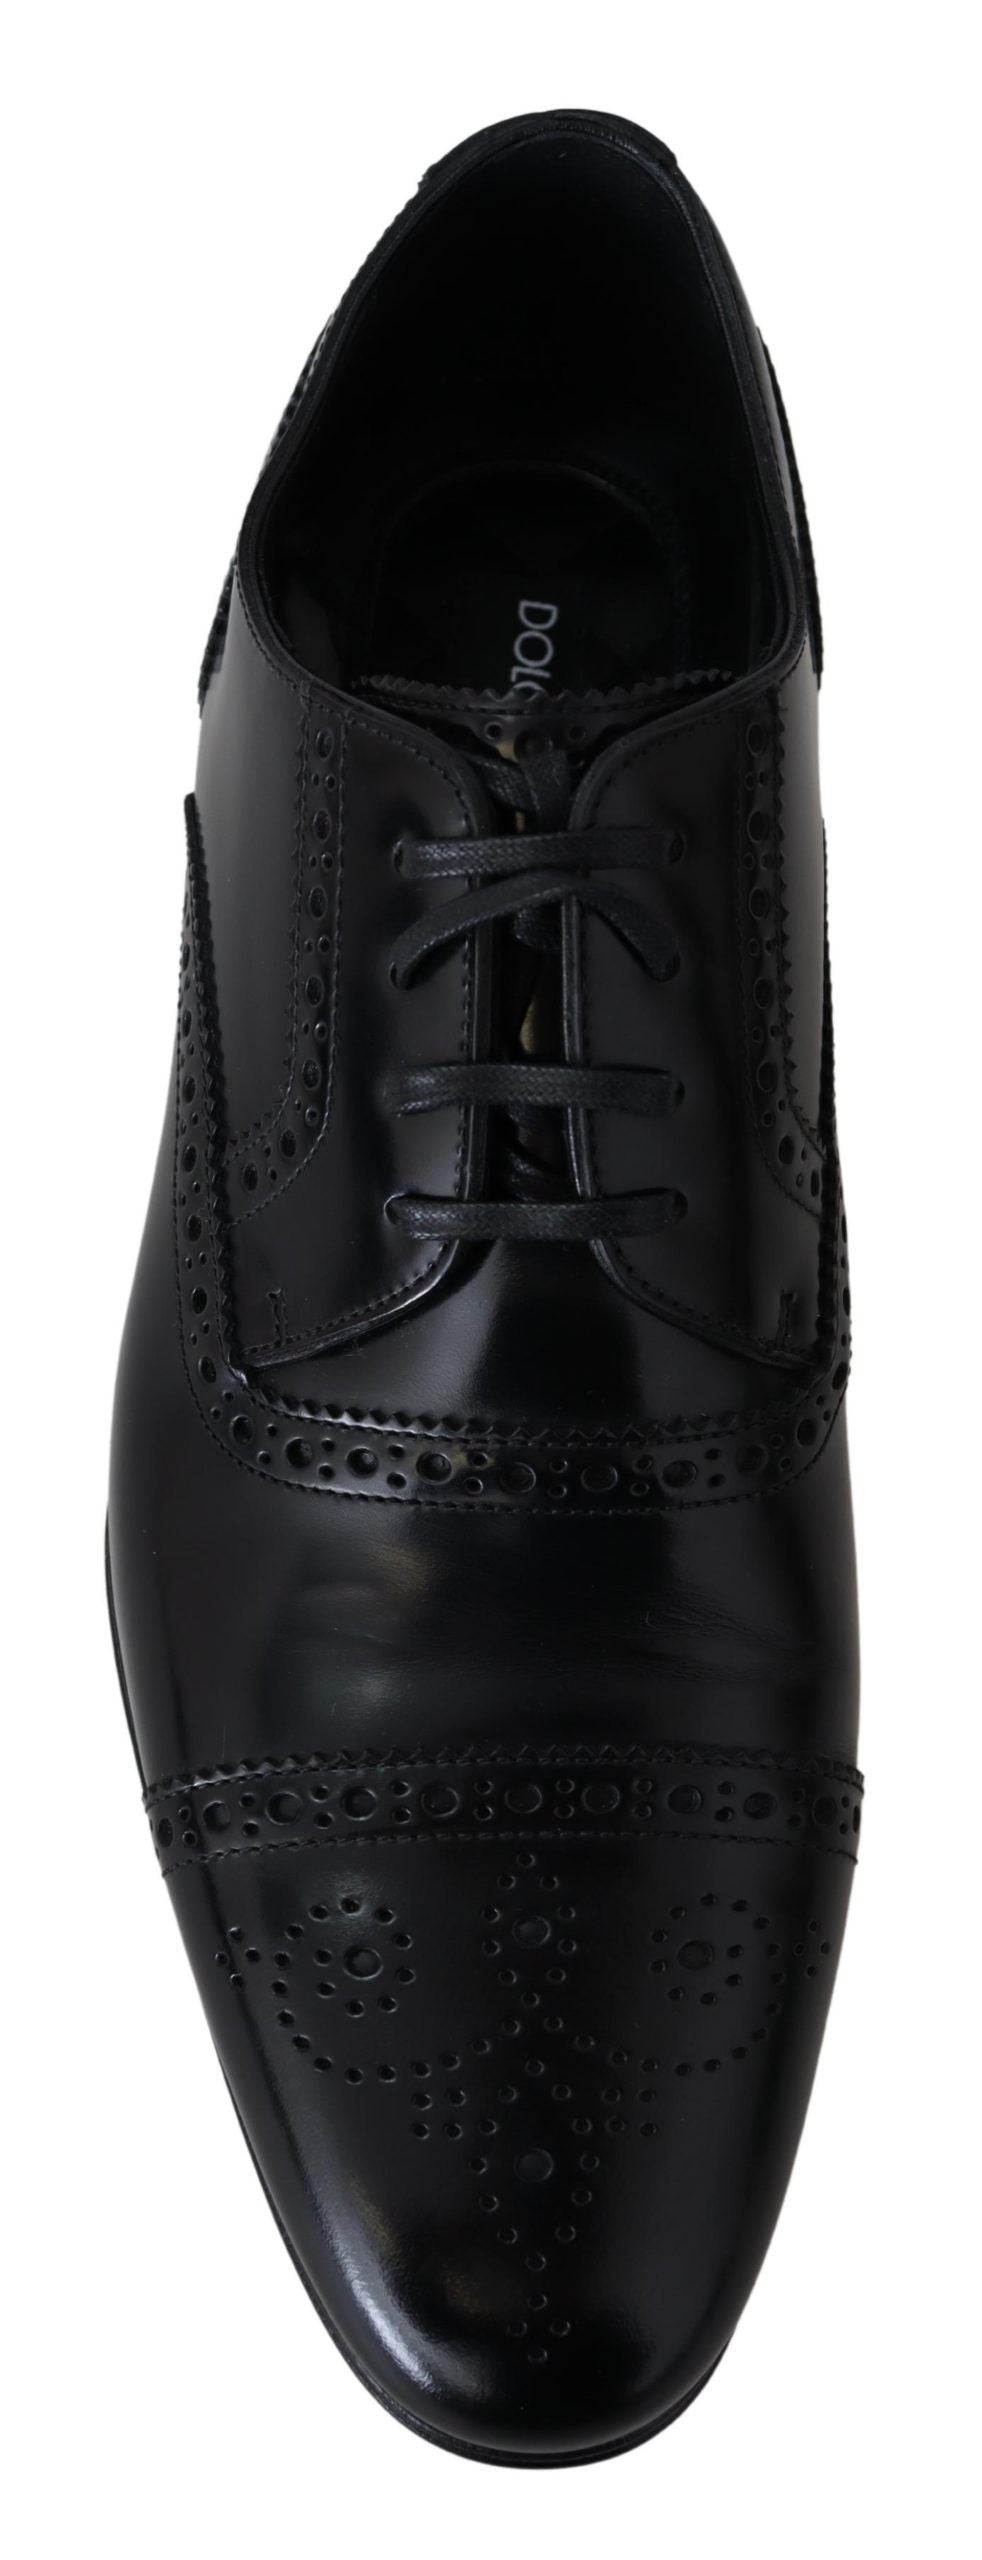 Black Leather Men Derby Formal Loafers Shoes - Designed by Dolce & Gabbana Available to Buy at a Discounted Price on Moon Behind The Hill Online Designer Discount Store